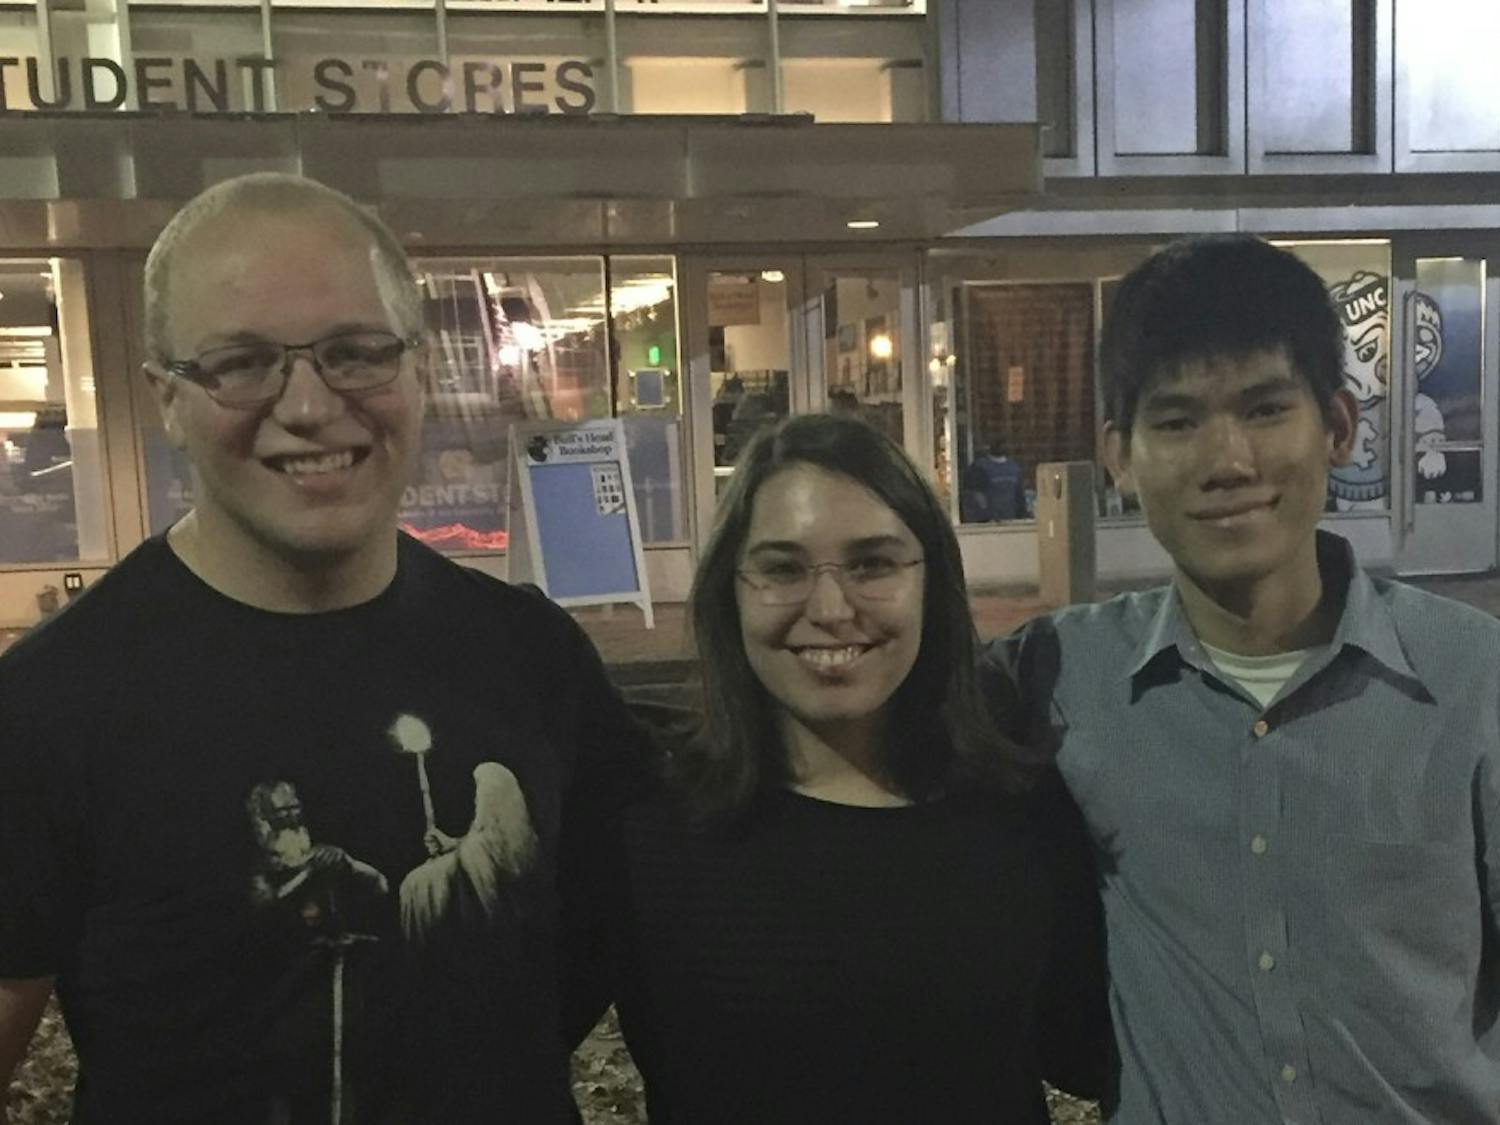 (From left) Alec Niccum, Alex Patmore Marquez and Alan Cat, members of the UNC sci-fi club TARDIS, pose outside Student Stores.